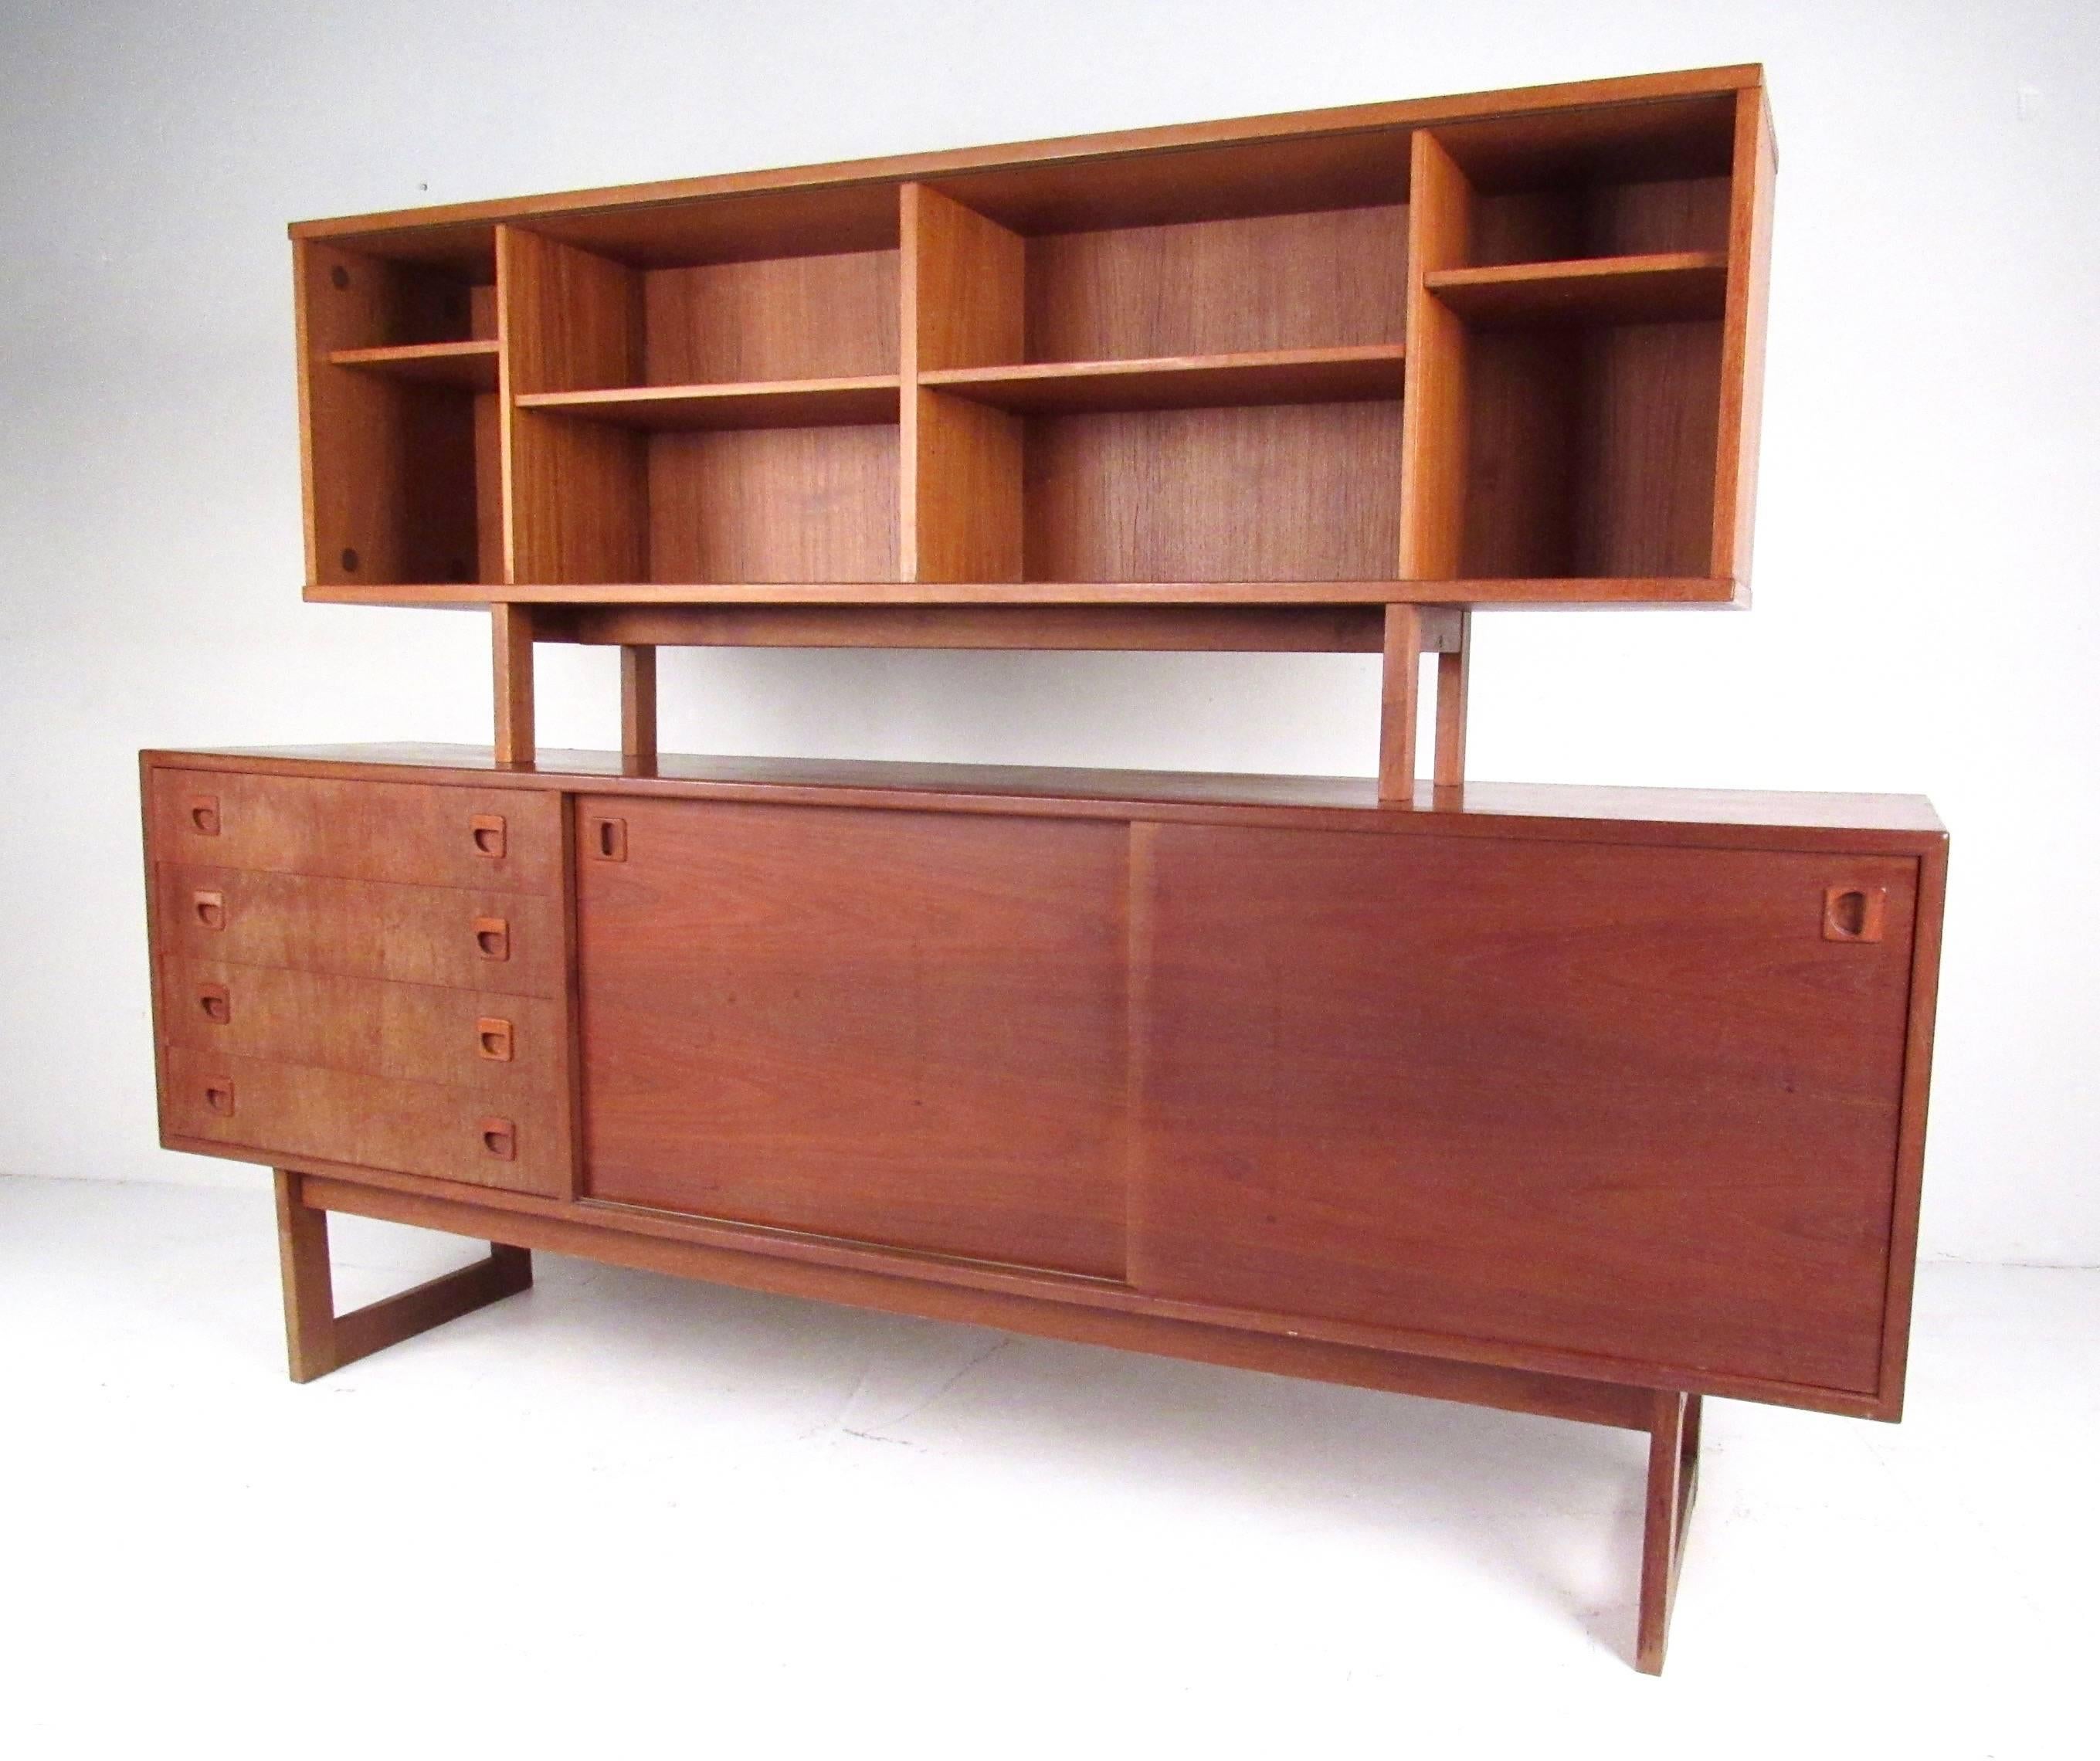 Danish modern sideboard features vintage teak construction with dovetail drawers and sled legs. Spacious storage options include sliding door shelved cabinets, drawers with carved pulls, and bookcase display topper with glass doors. Please confirm